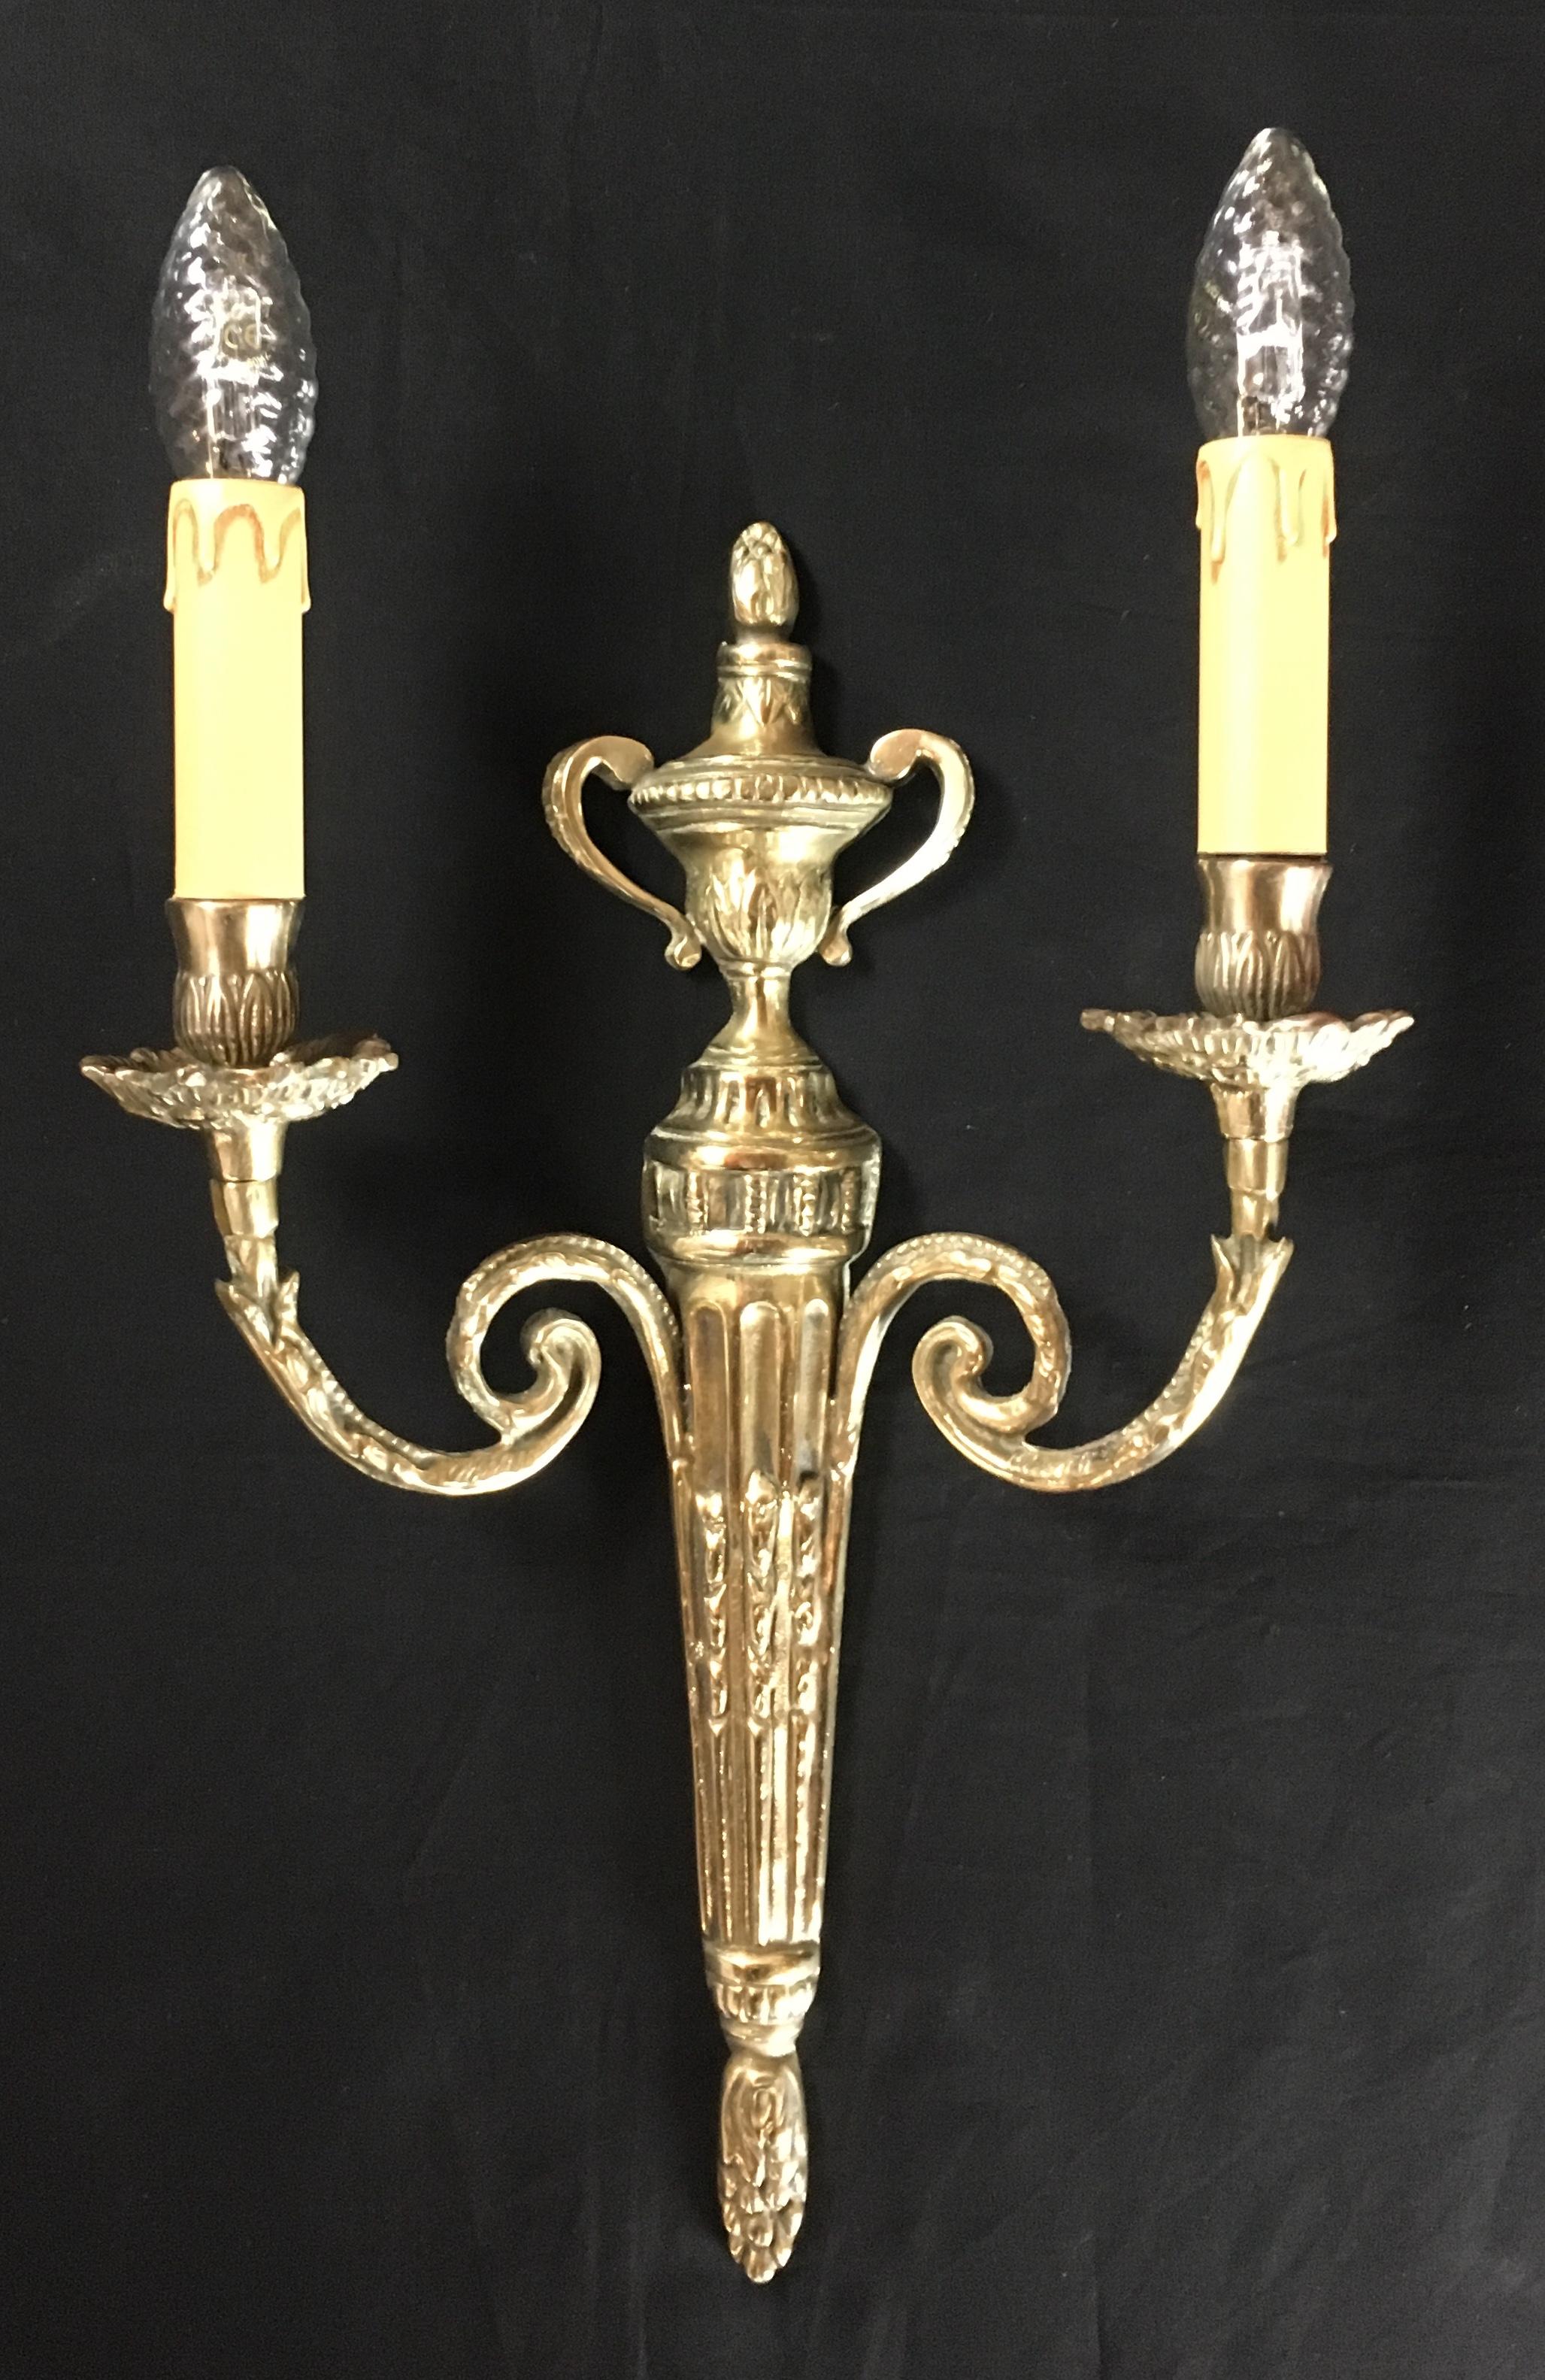 A fine set of 4 Louis XVI - neoclassical style bronze two-armed wall sconces in original form.

These very decorative wall lights have a beautiful finish and patina and would look great in modern, contemporary or traditional homes.

Measures: Height